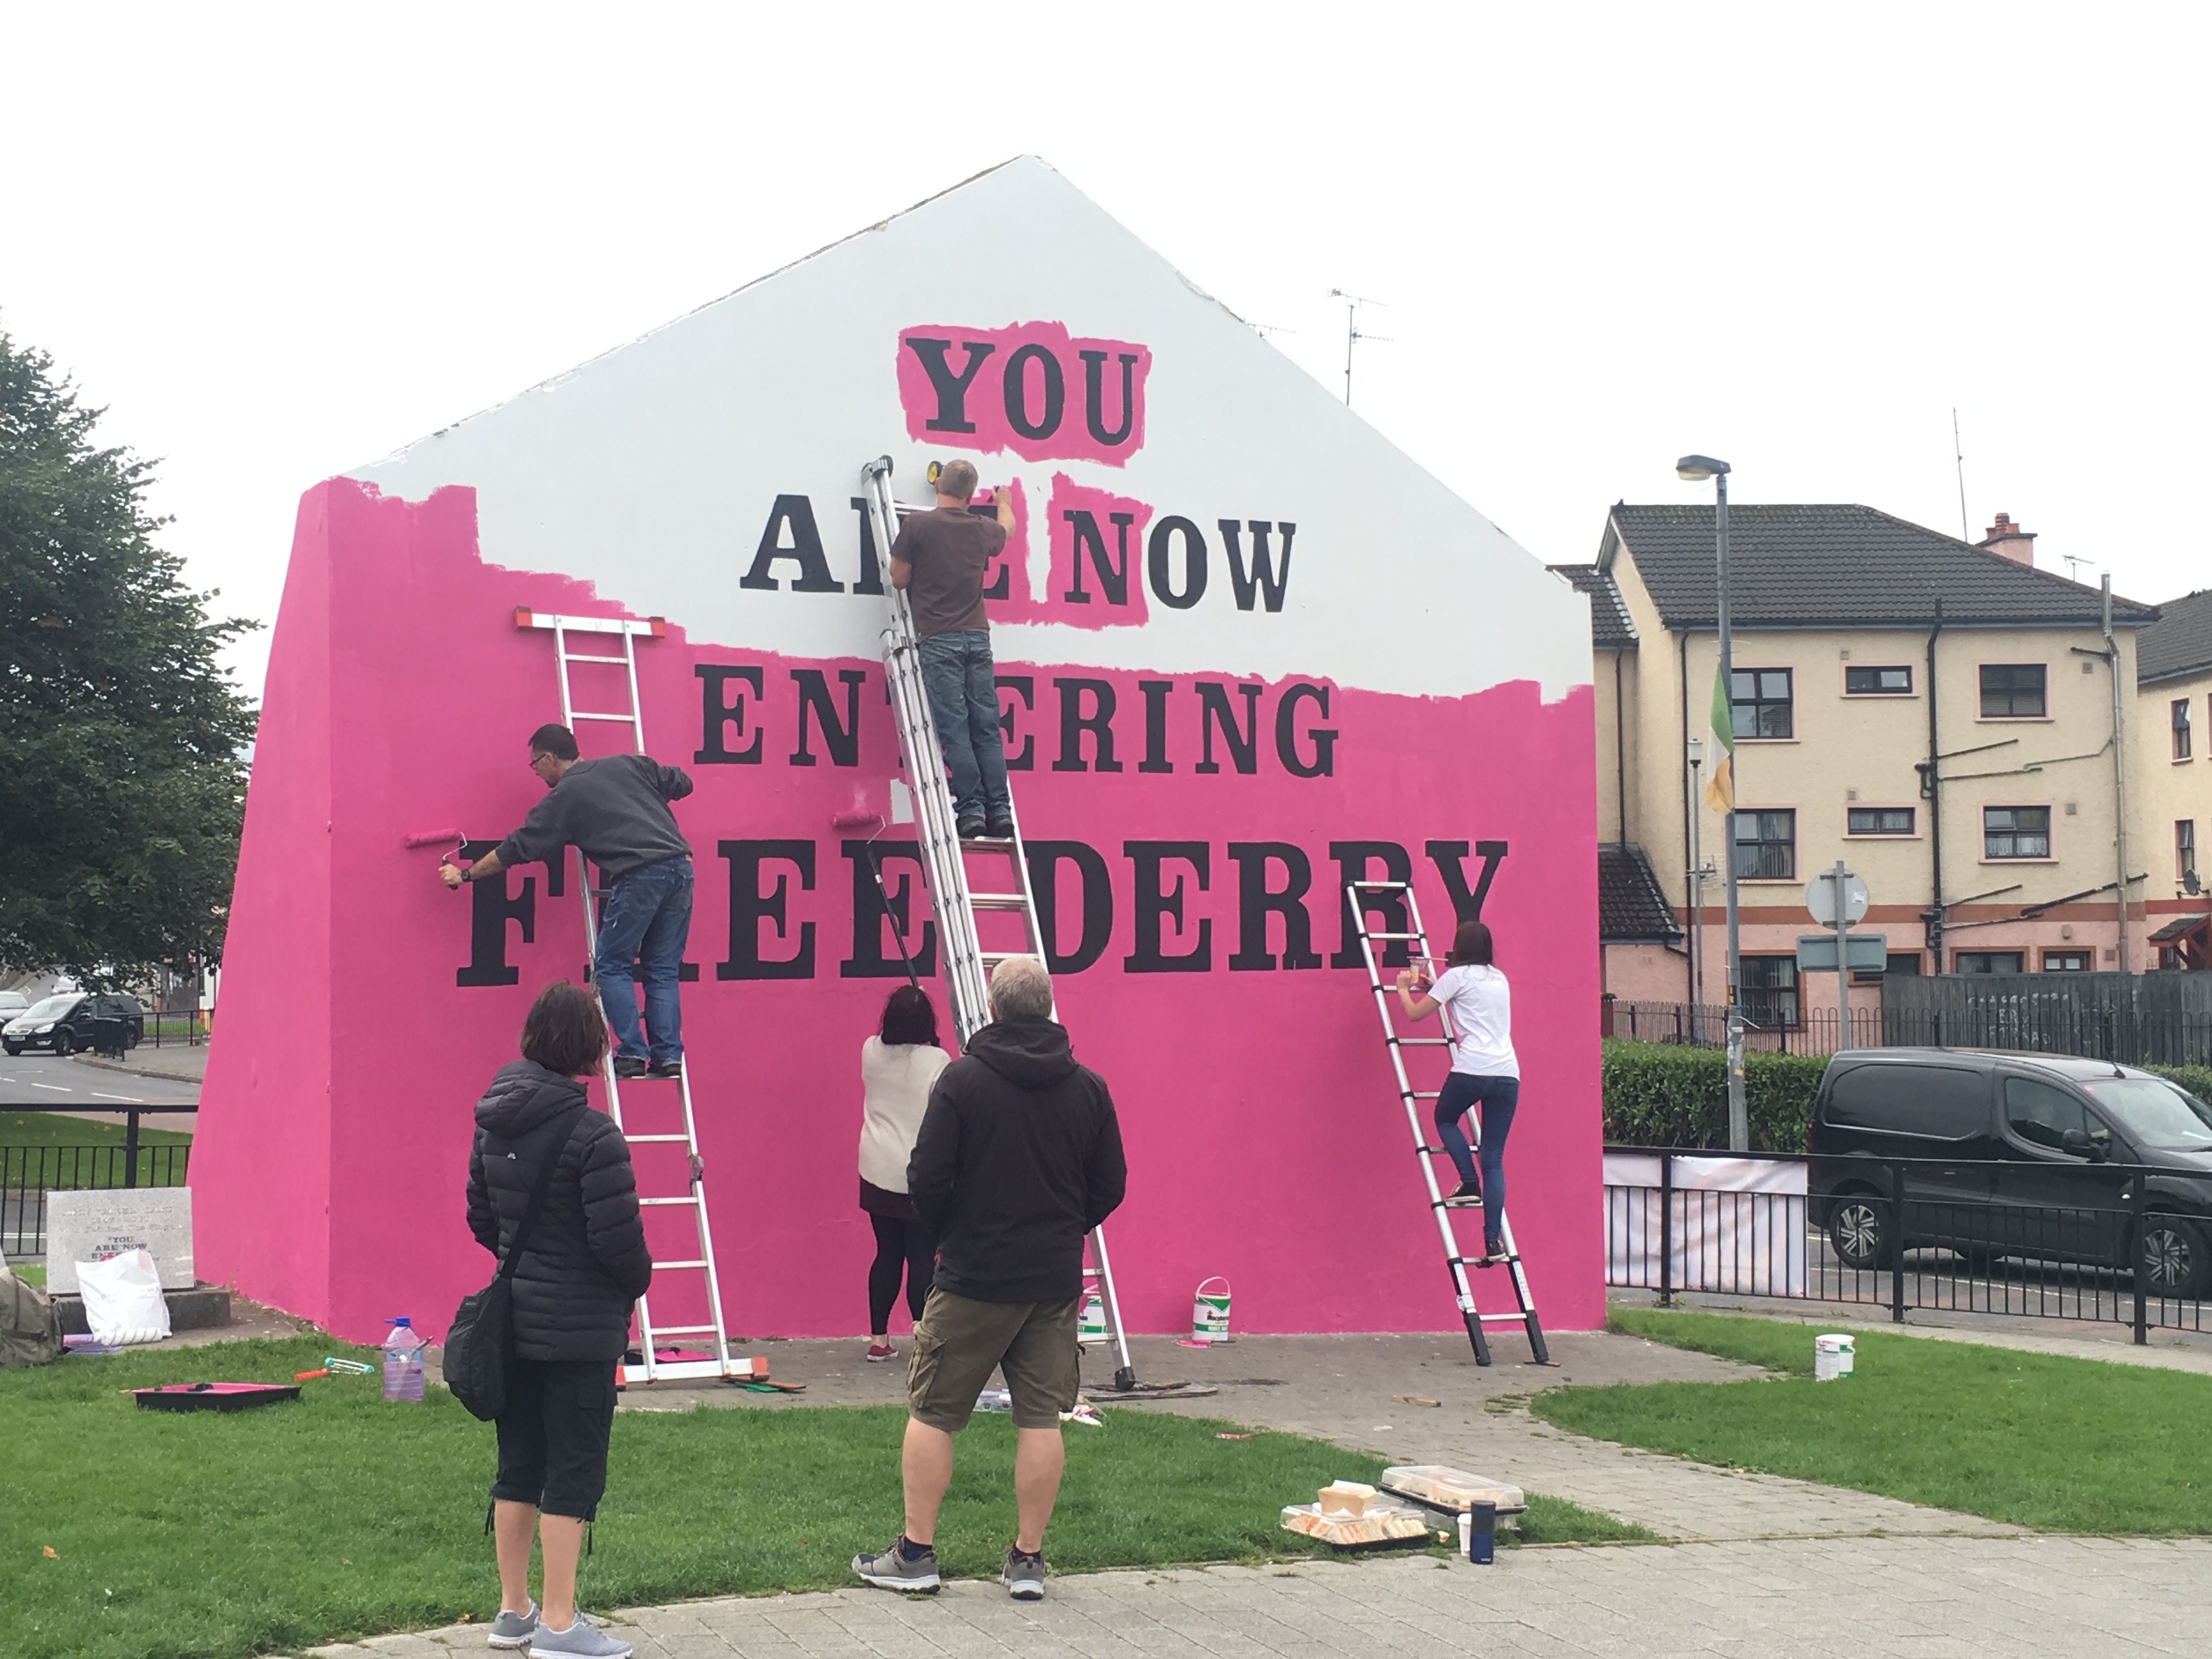 “You Are Now Entering Free Derry” Mural. The Free Derry mural, signifying police ‘no go’ zones during The Troubles, is painted pink for Pride. Photo by Julia Canney. Northern Ireland, 2018.